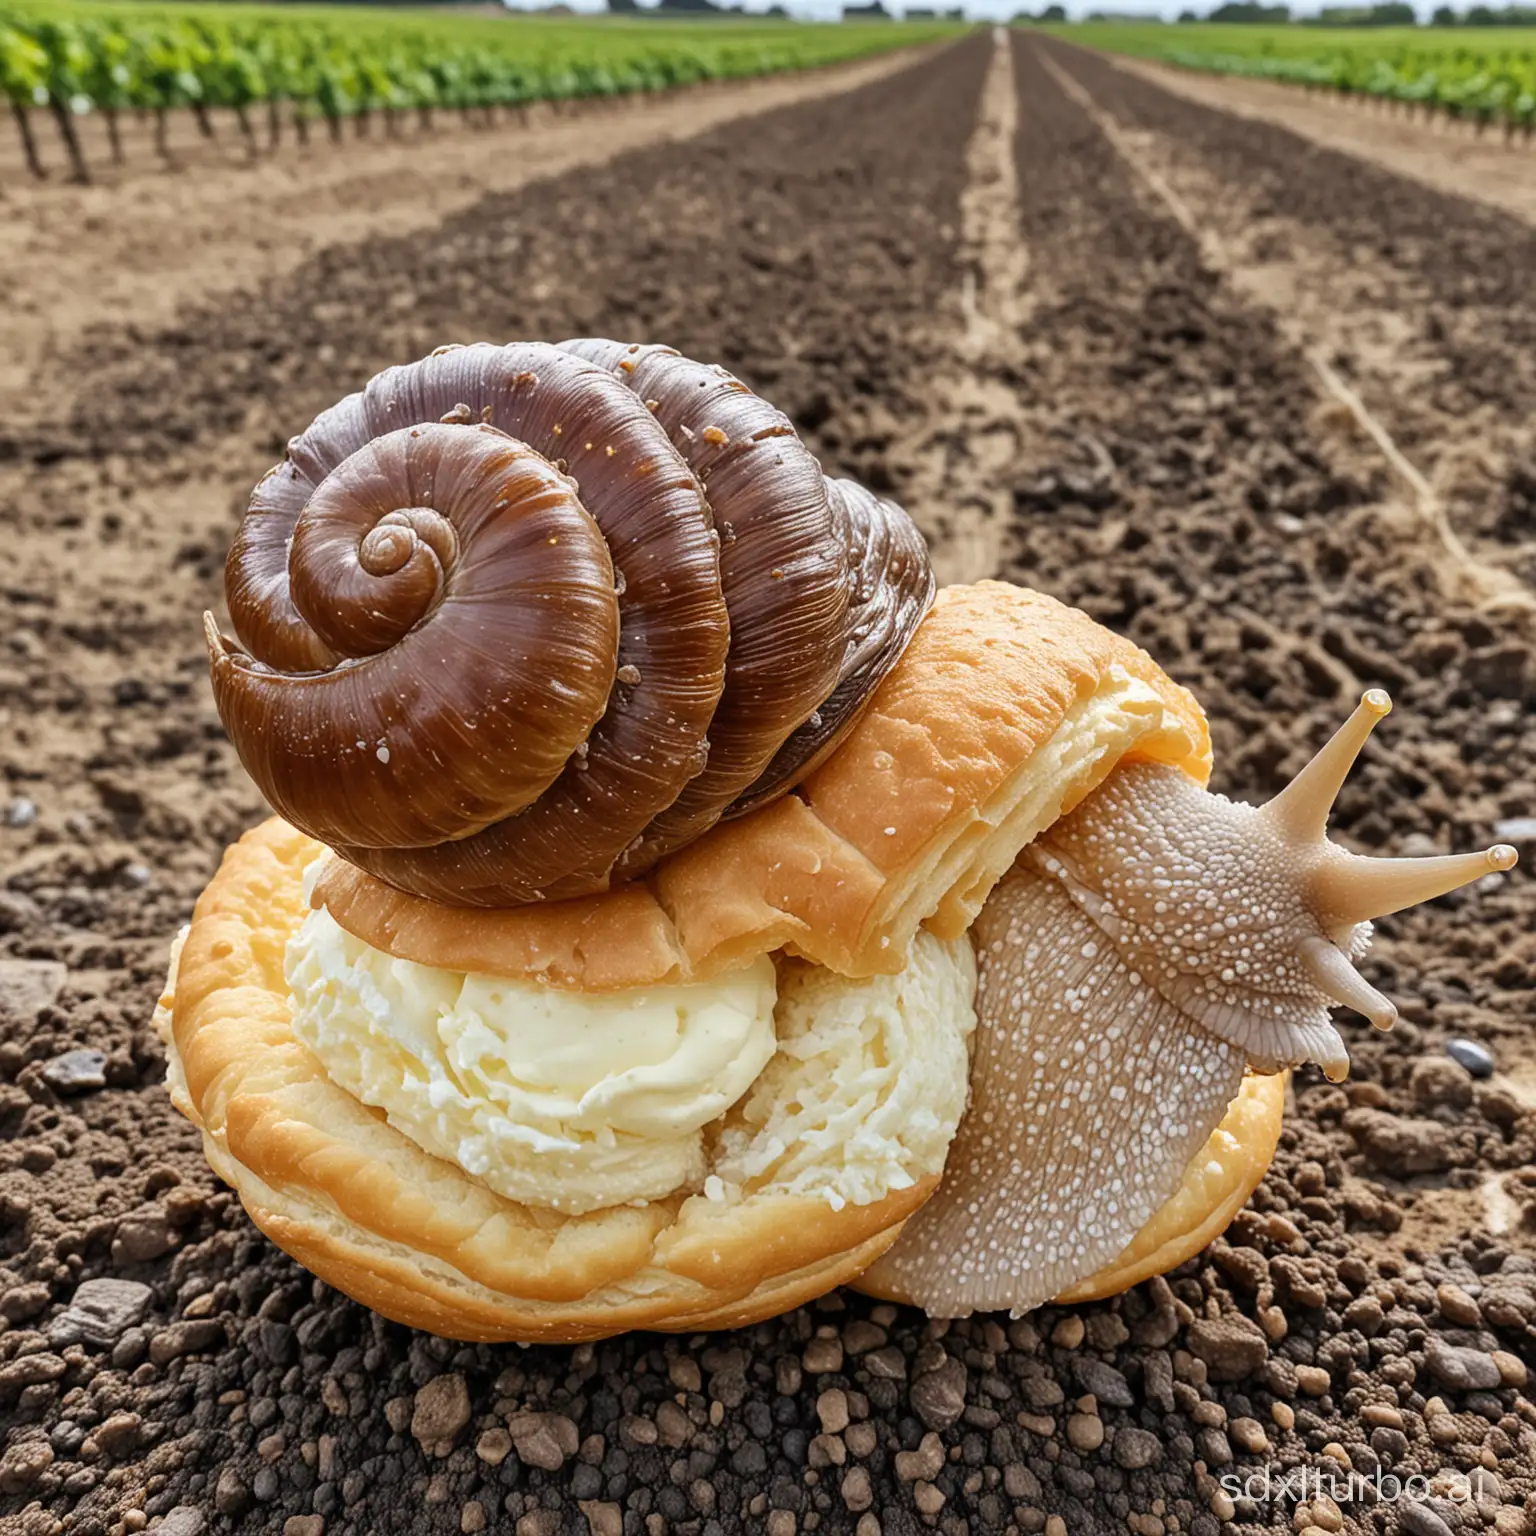 a huge vineyard snail that instead of a house has a cream puff on its back